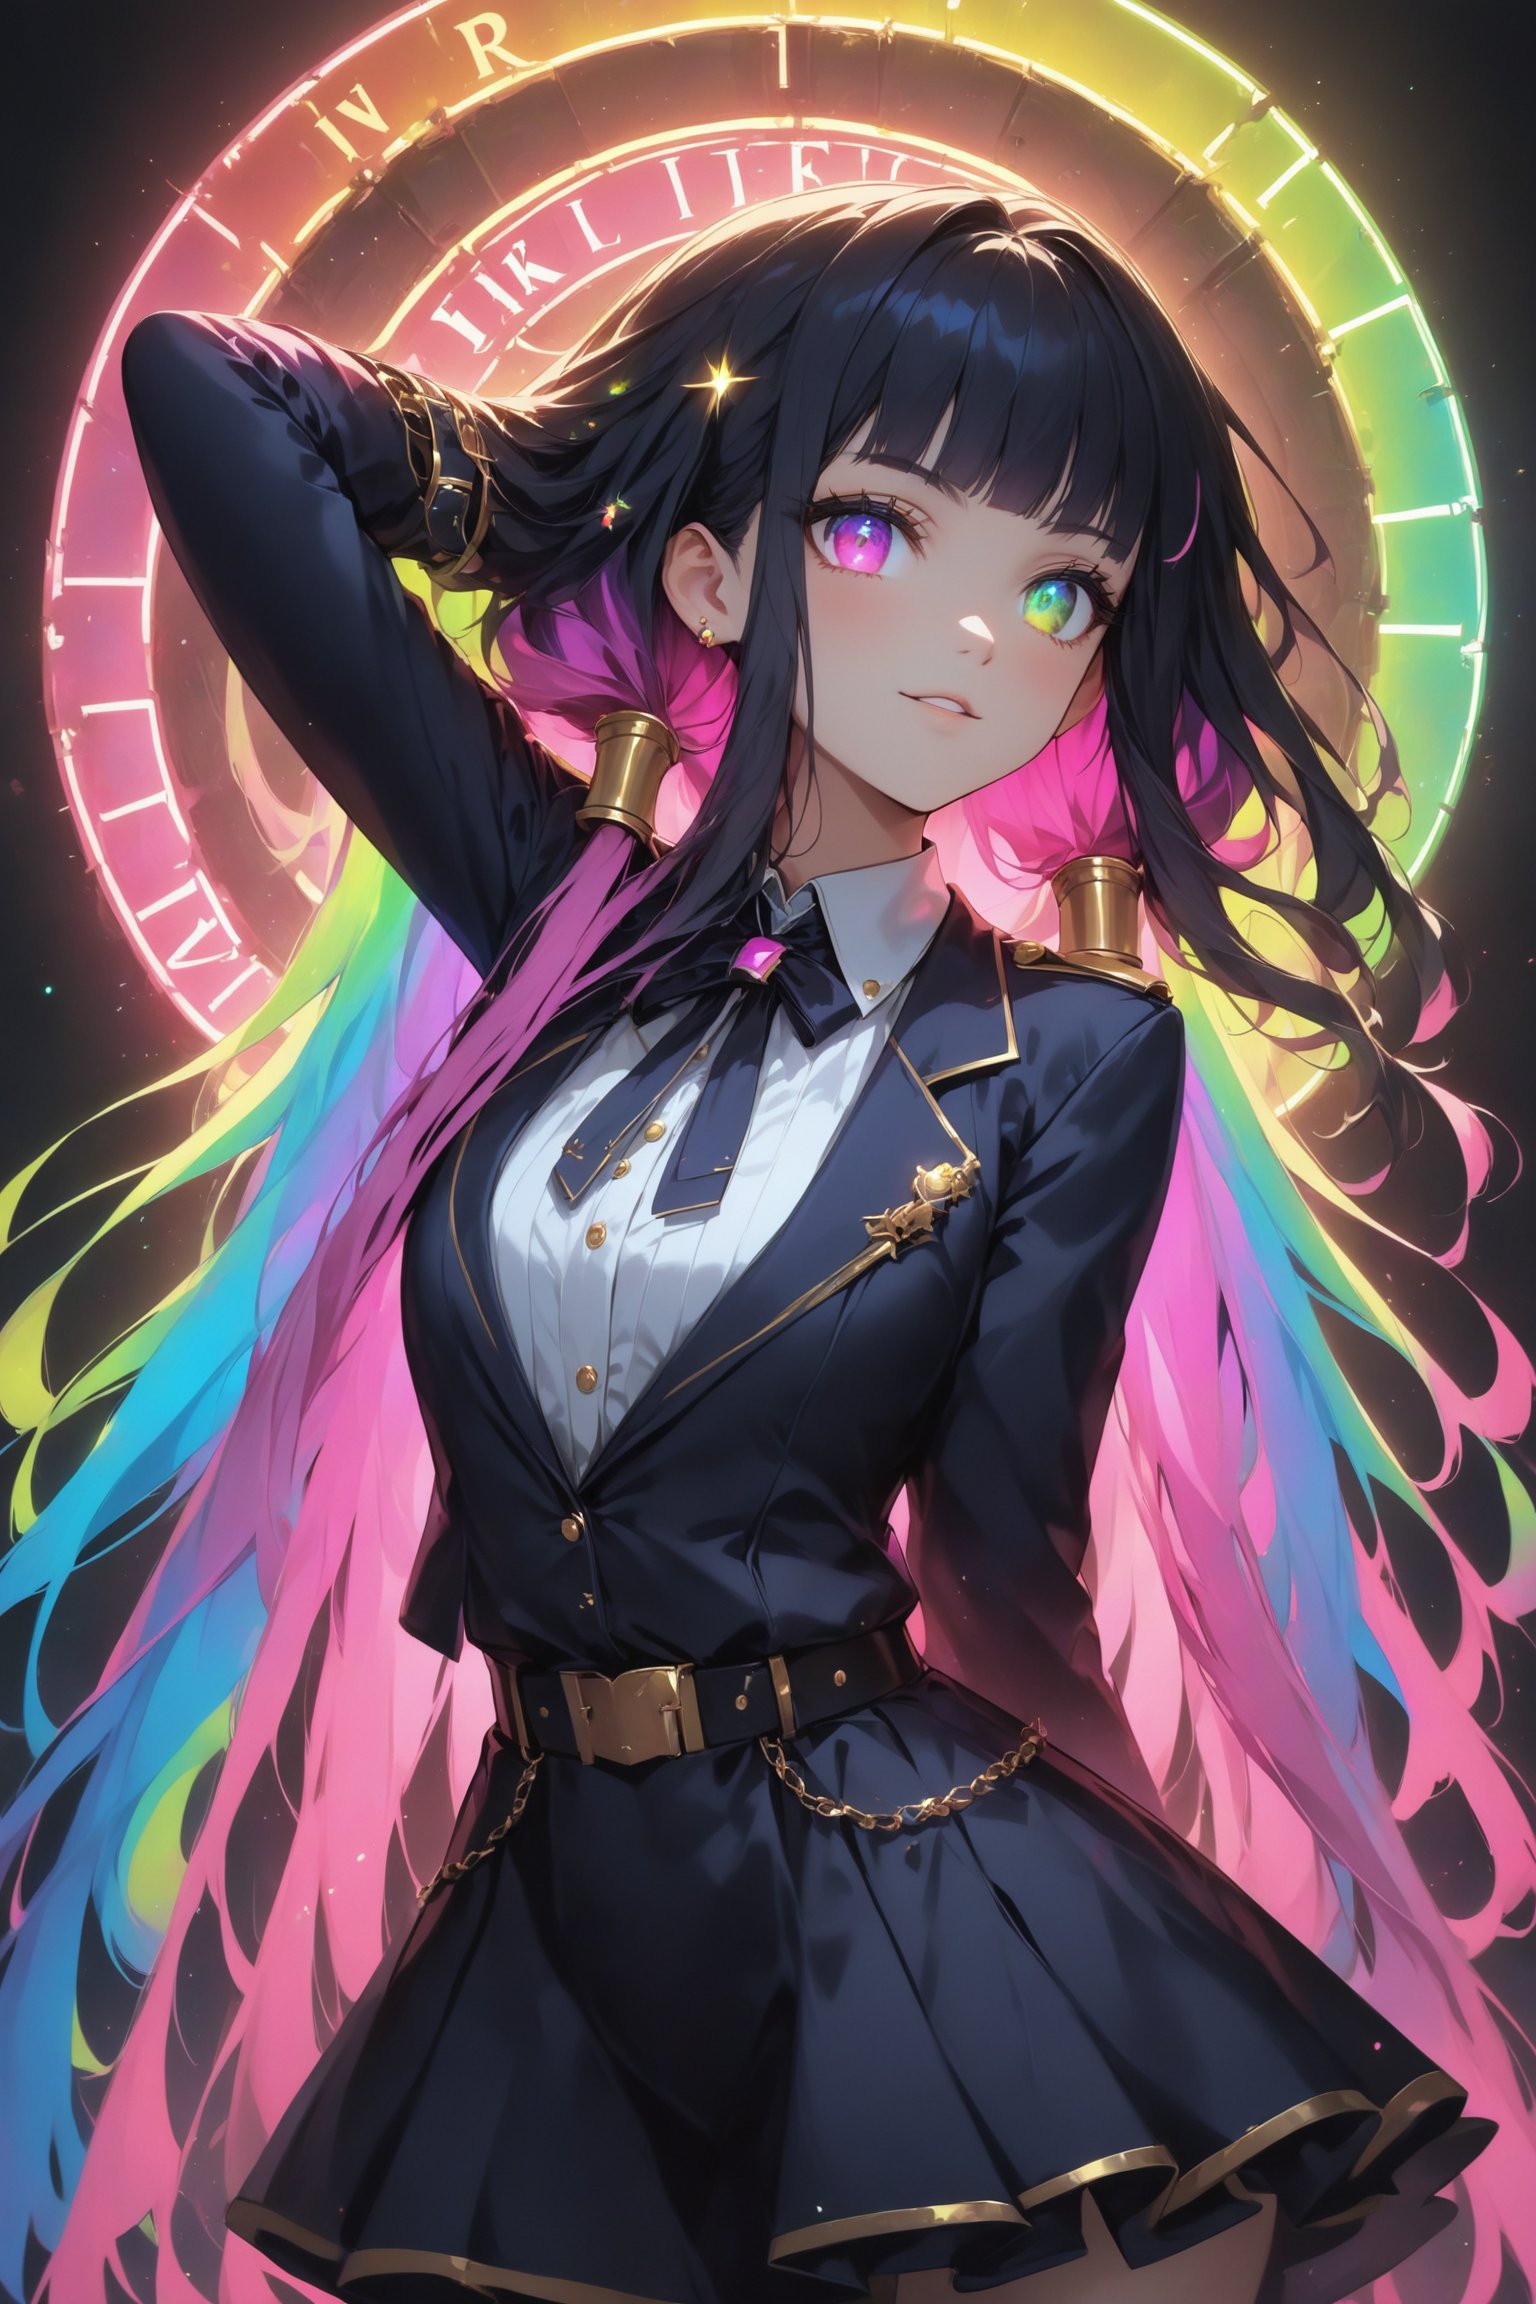 Ultra realistic,princess knight,((very long colorful dreadlocks)), seven-colored hair, wearing gorgeous and stylish western style dress suit, gold cuffs, rings,royal knight,dal,Rainbow haired girl ,zavy-hrglw,
((Hair that glows in 7 colors)), neon Light hair,Anime girl